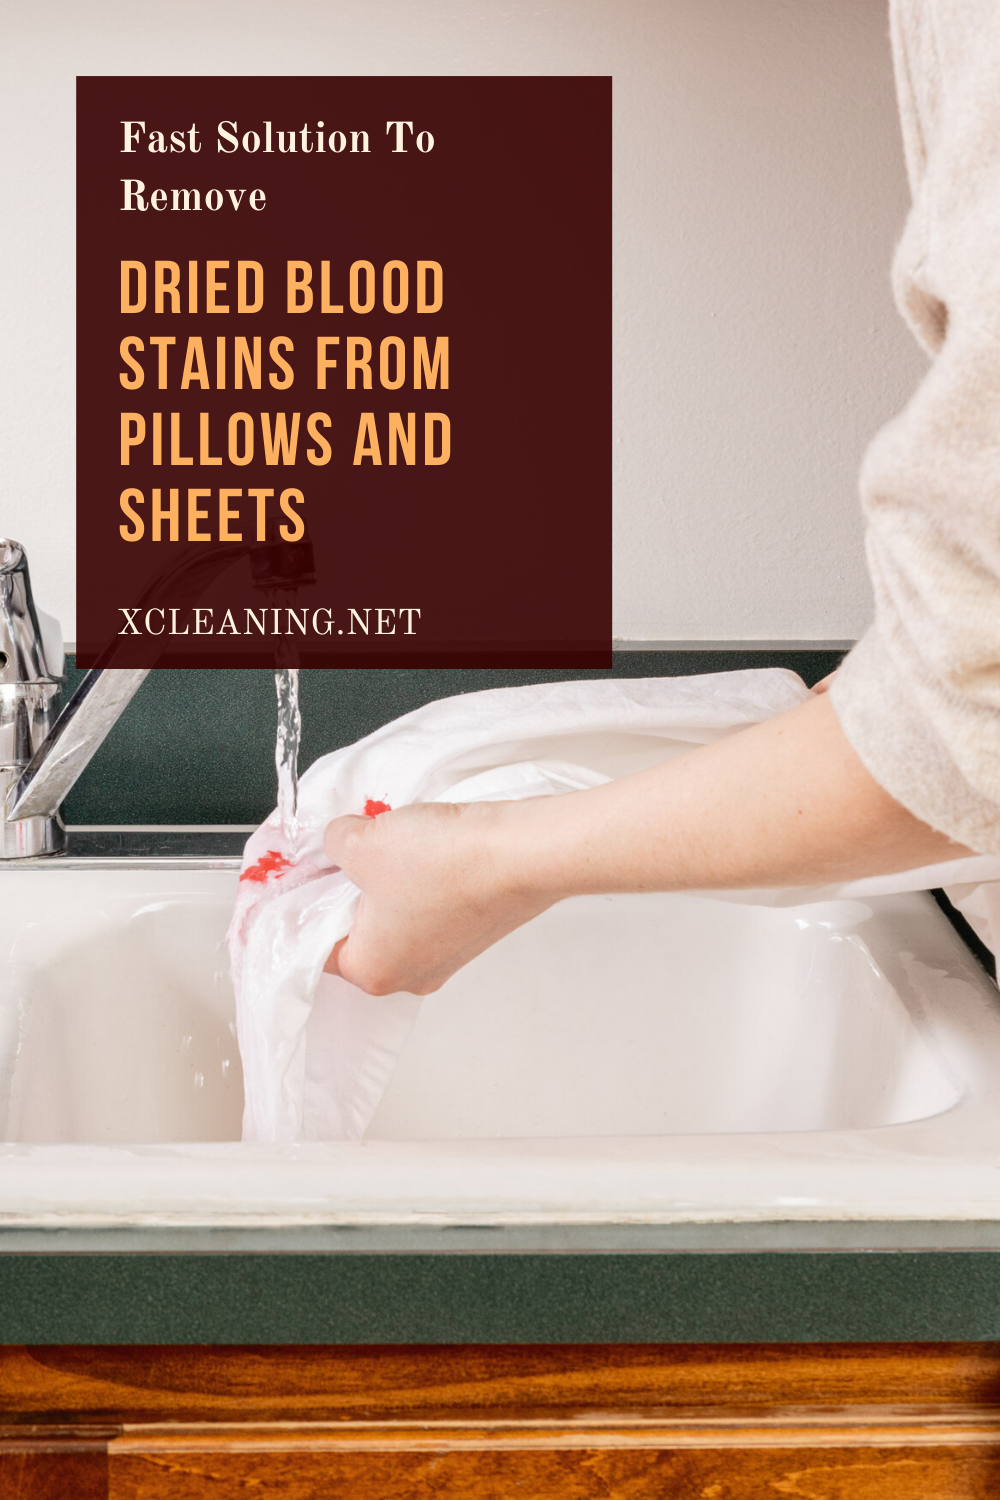 Fast Solution To Remove Dried Blood Stains From Pillows And Sheets ...